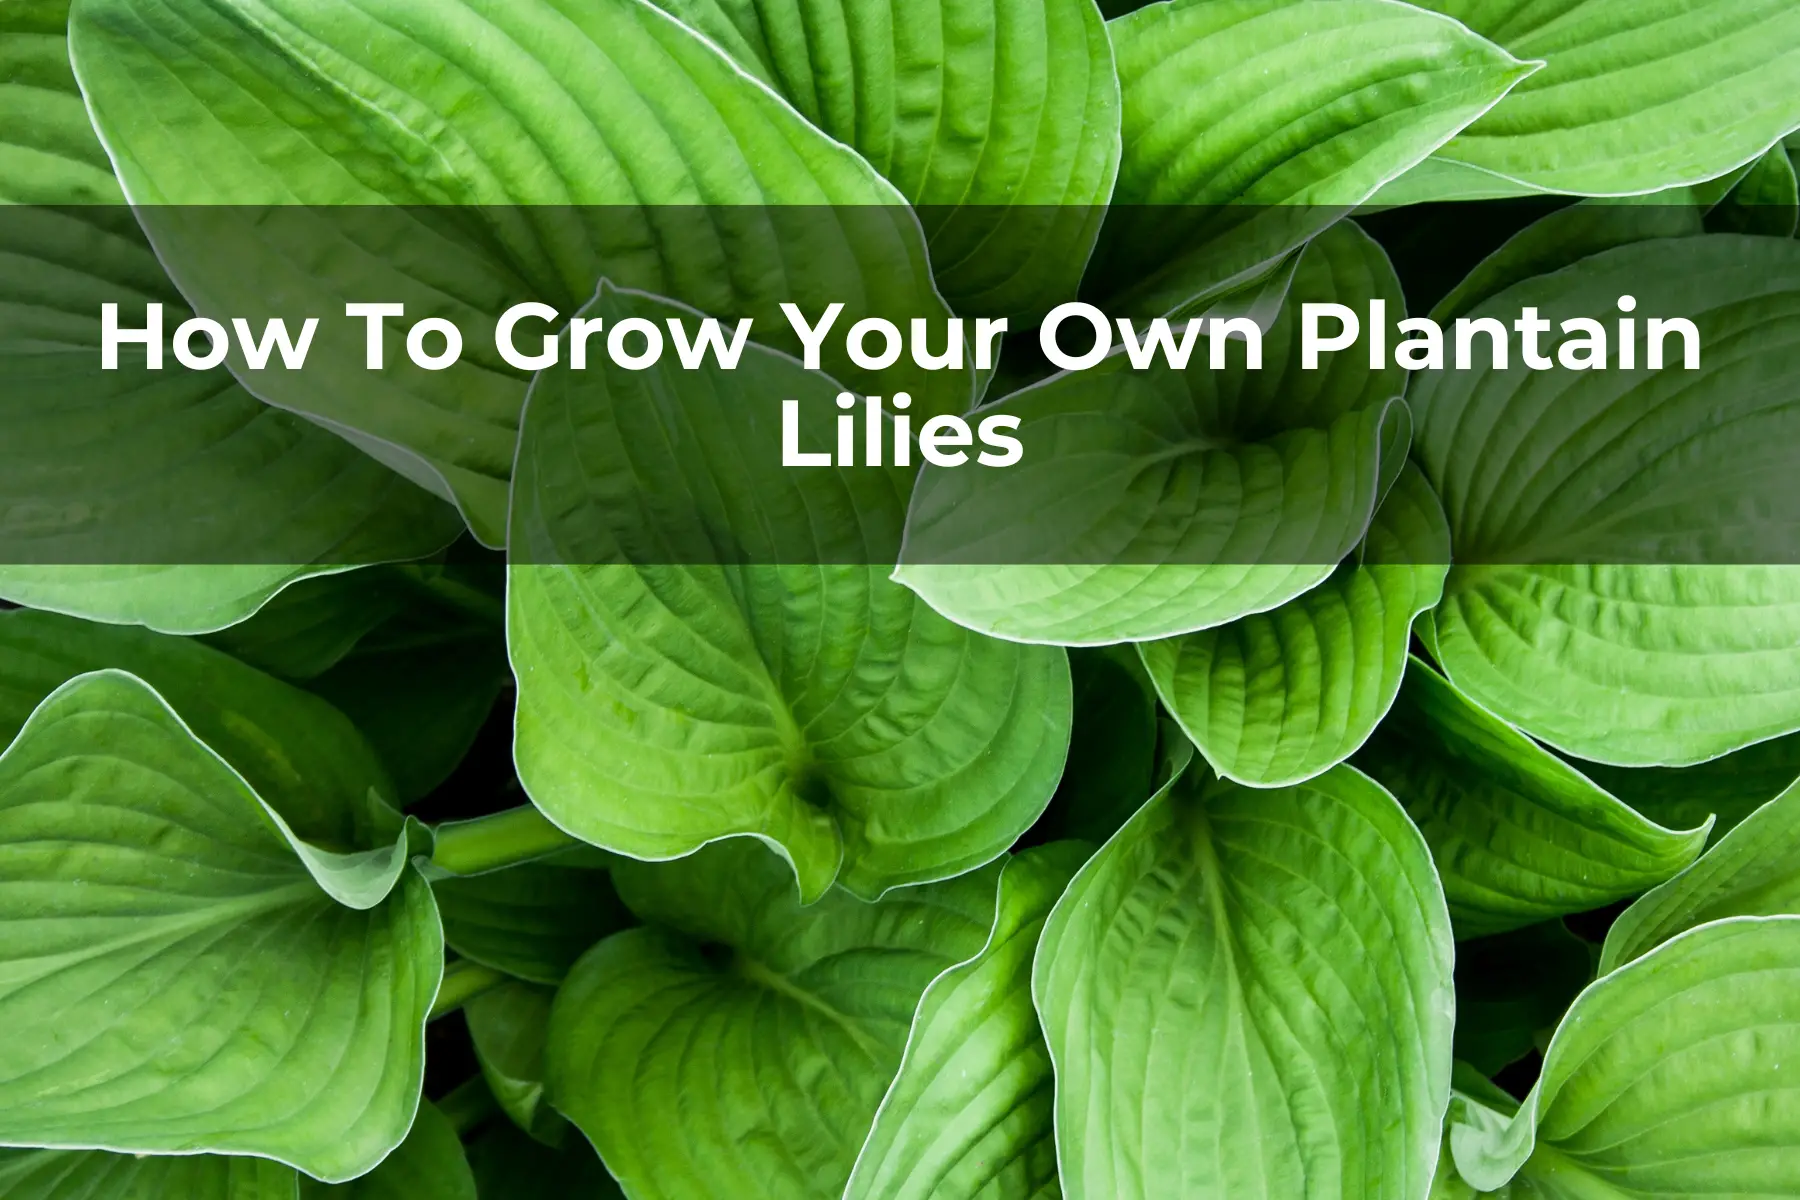 How To Grow Your Own Plantain Lilies